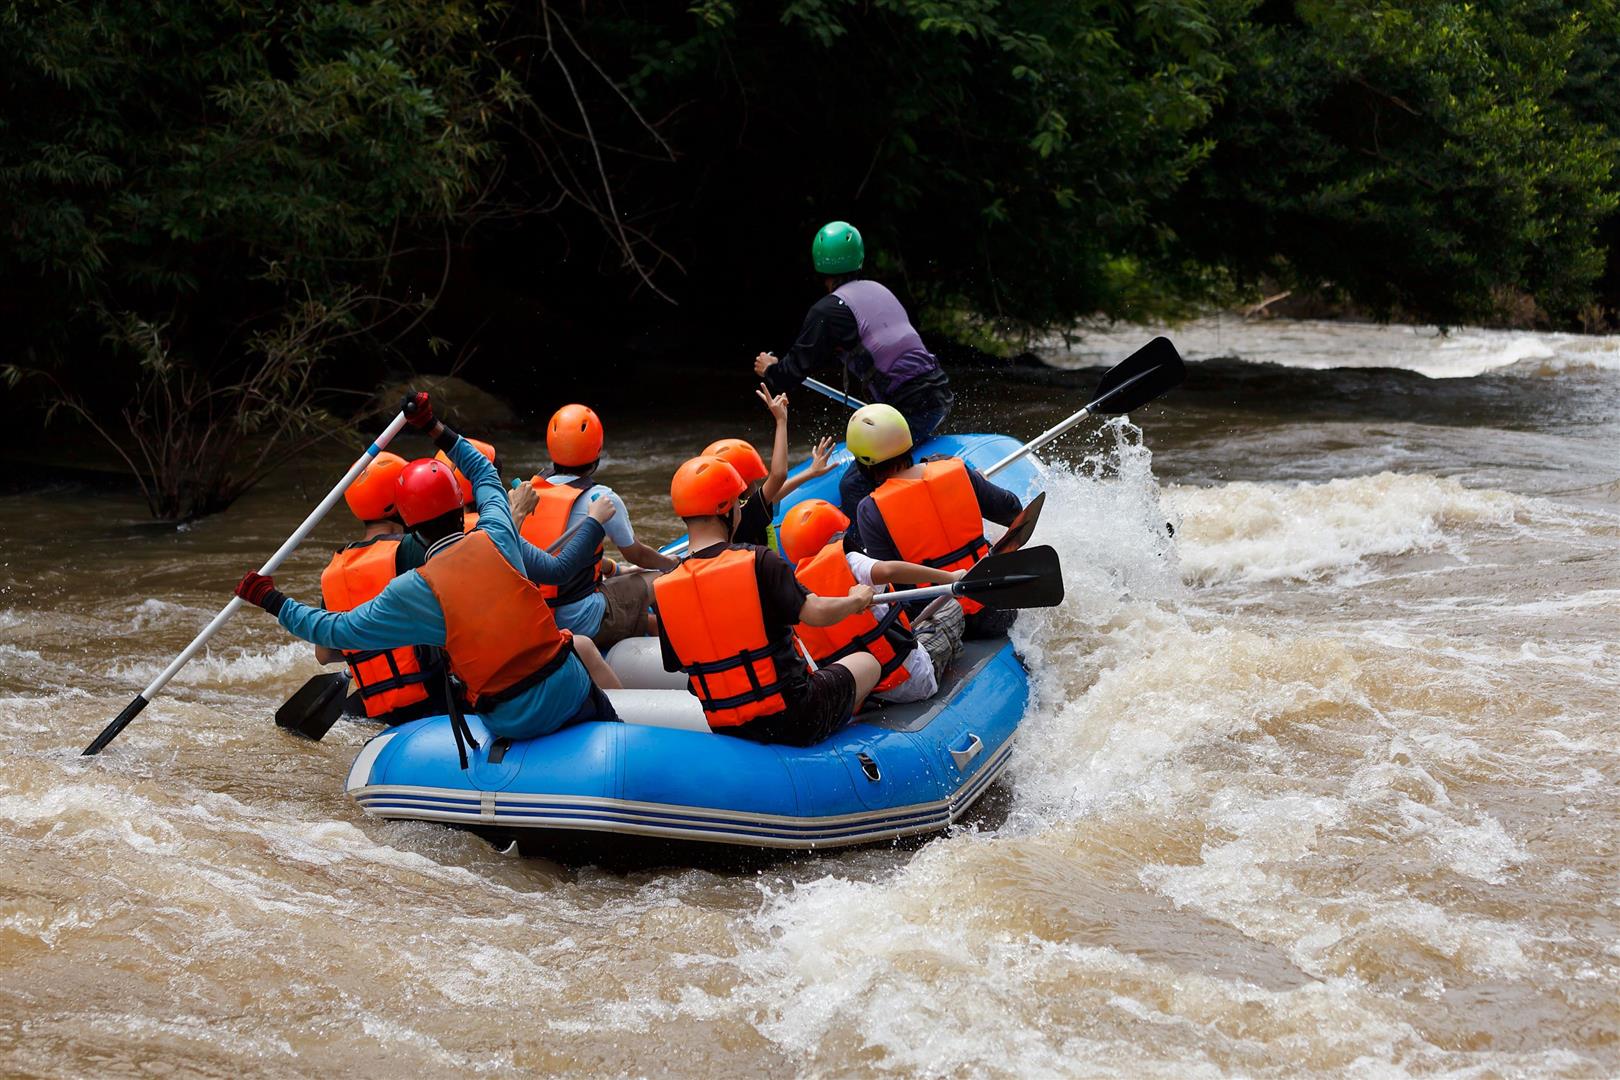 Fun Rafting Place, Rafting along the Khek River, Phitsanulok Province (Describe activities, places, suitable times to travel, travelling)